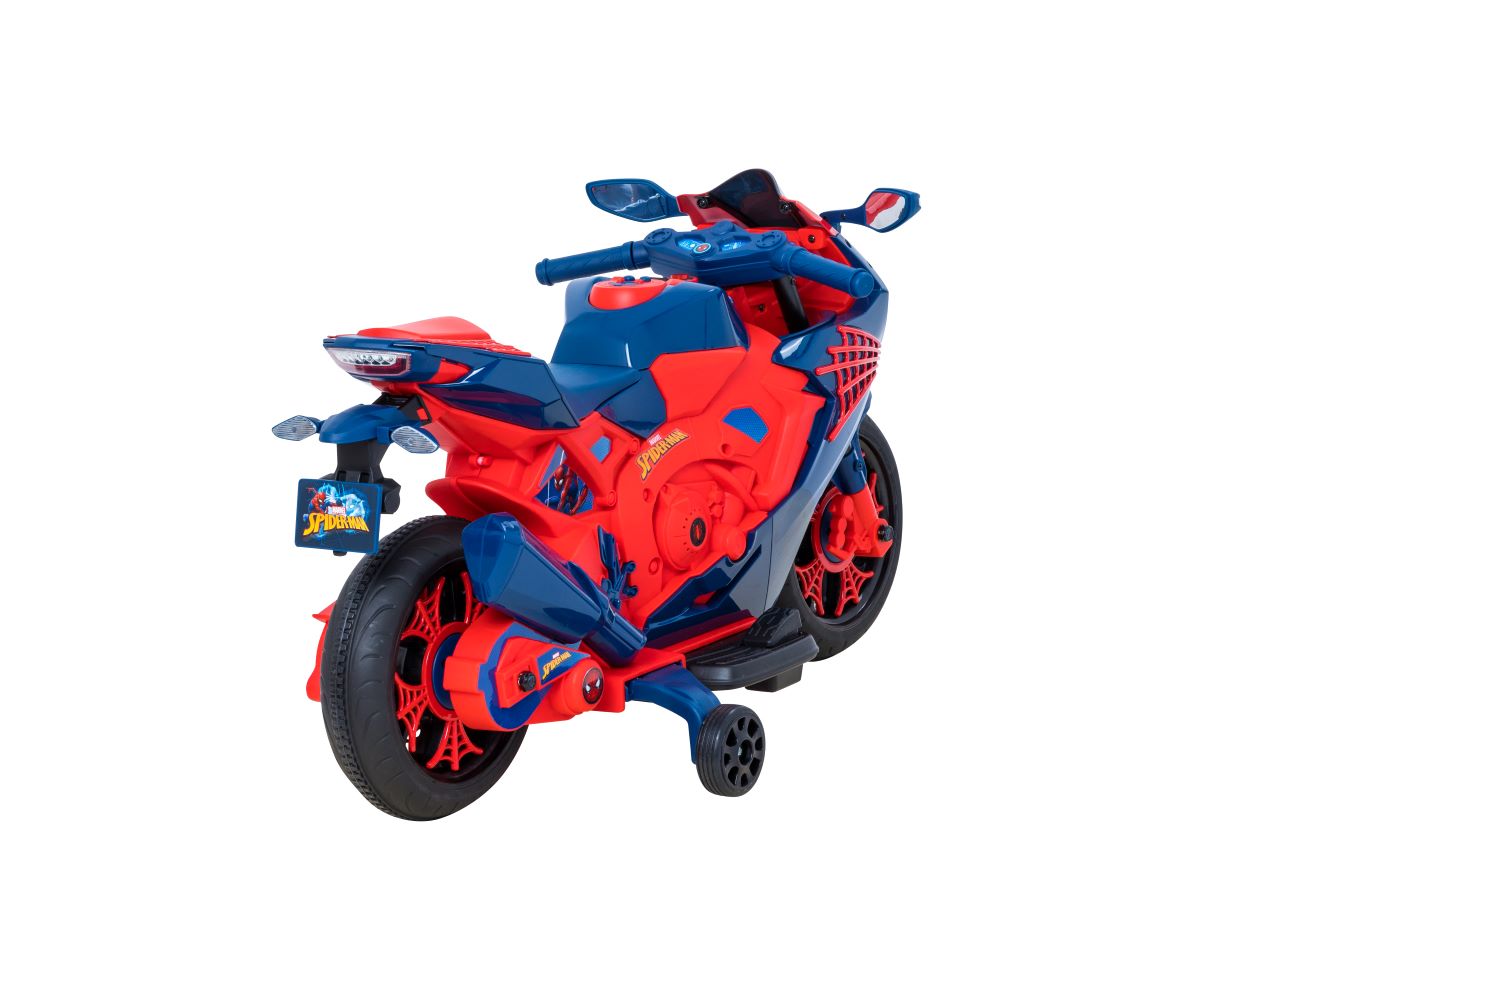 Spiderman 6V Motorcycle Ride On, for Kids, Ages 3+, Rechargeable Battery,  up to 65lbs